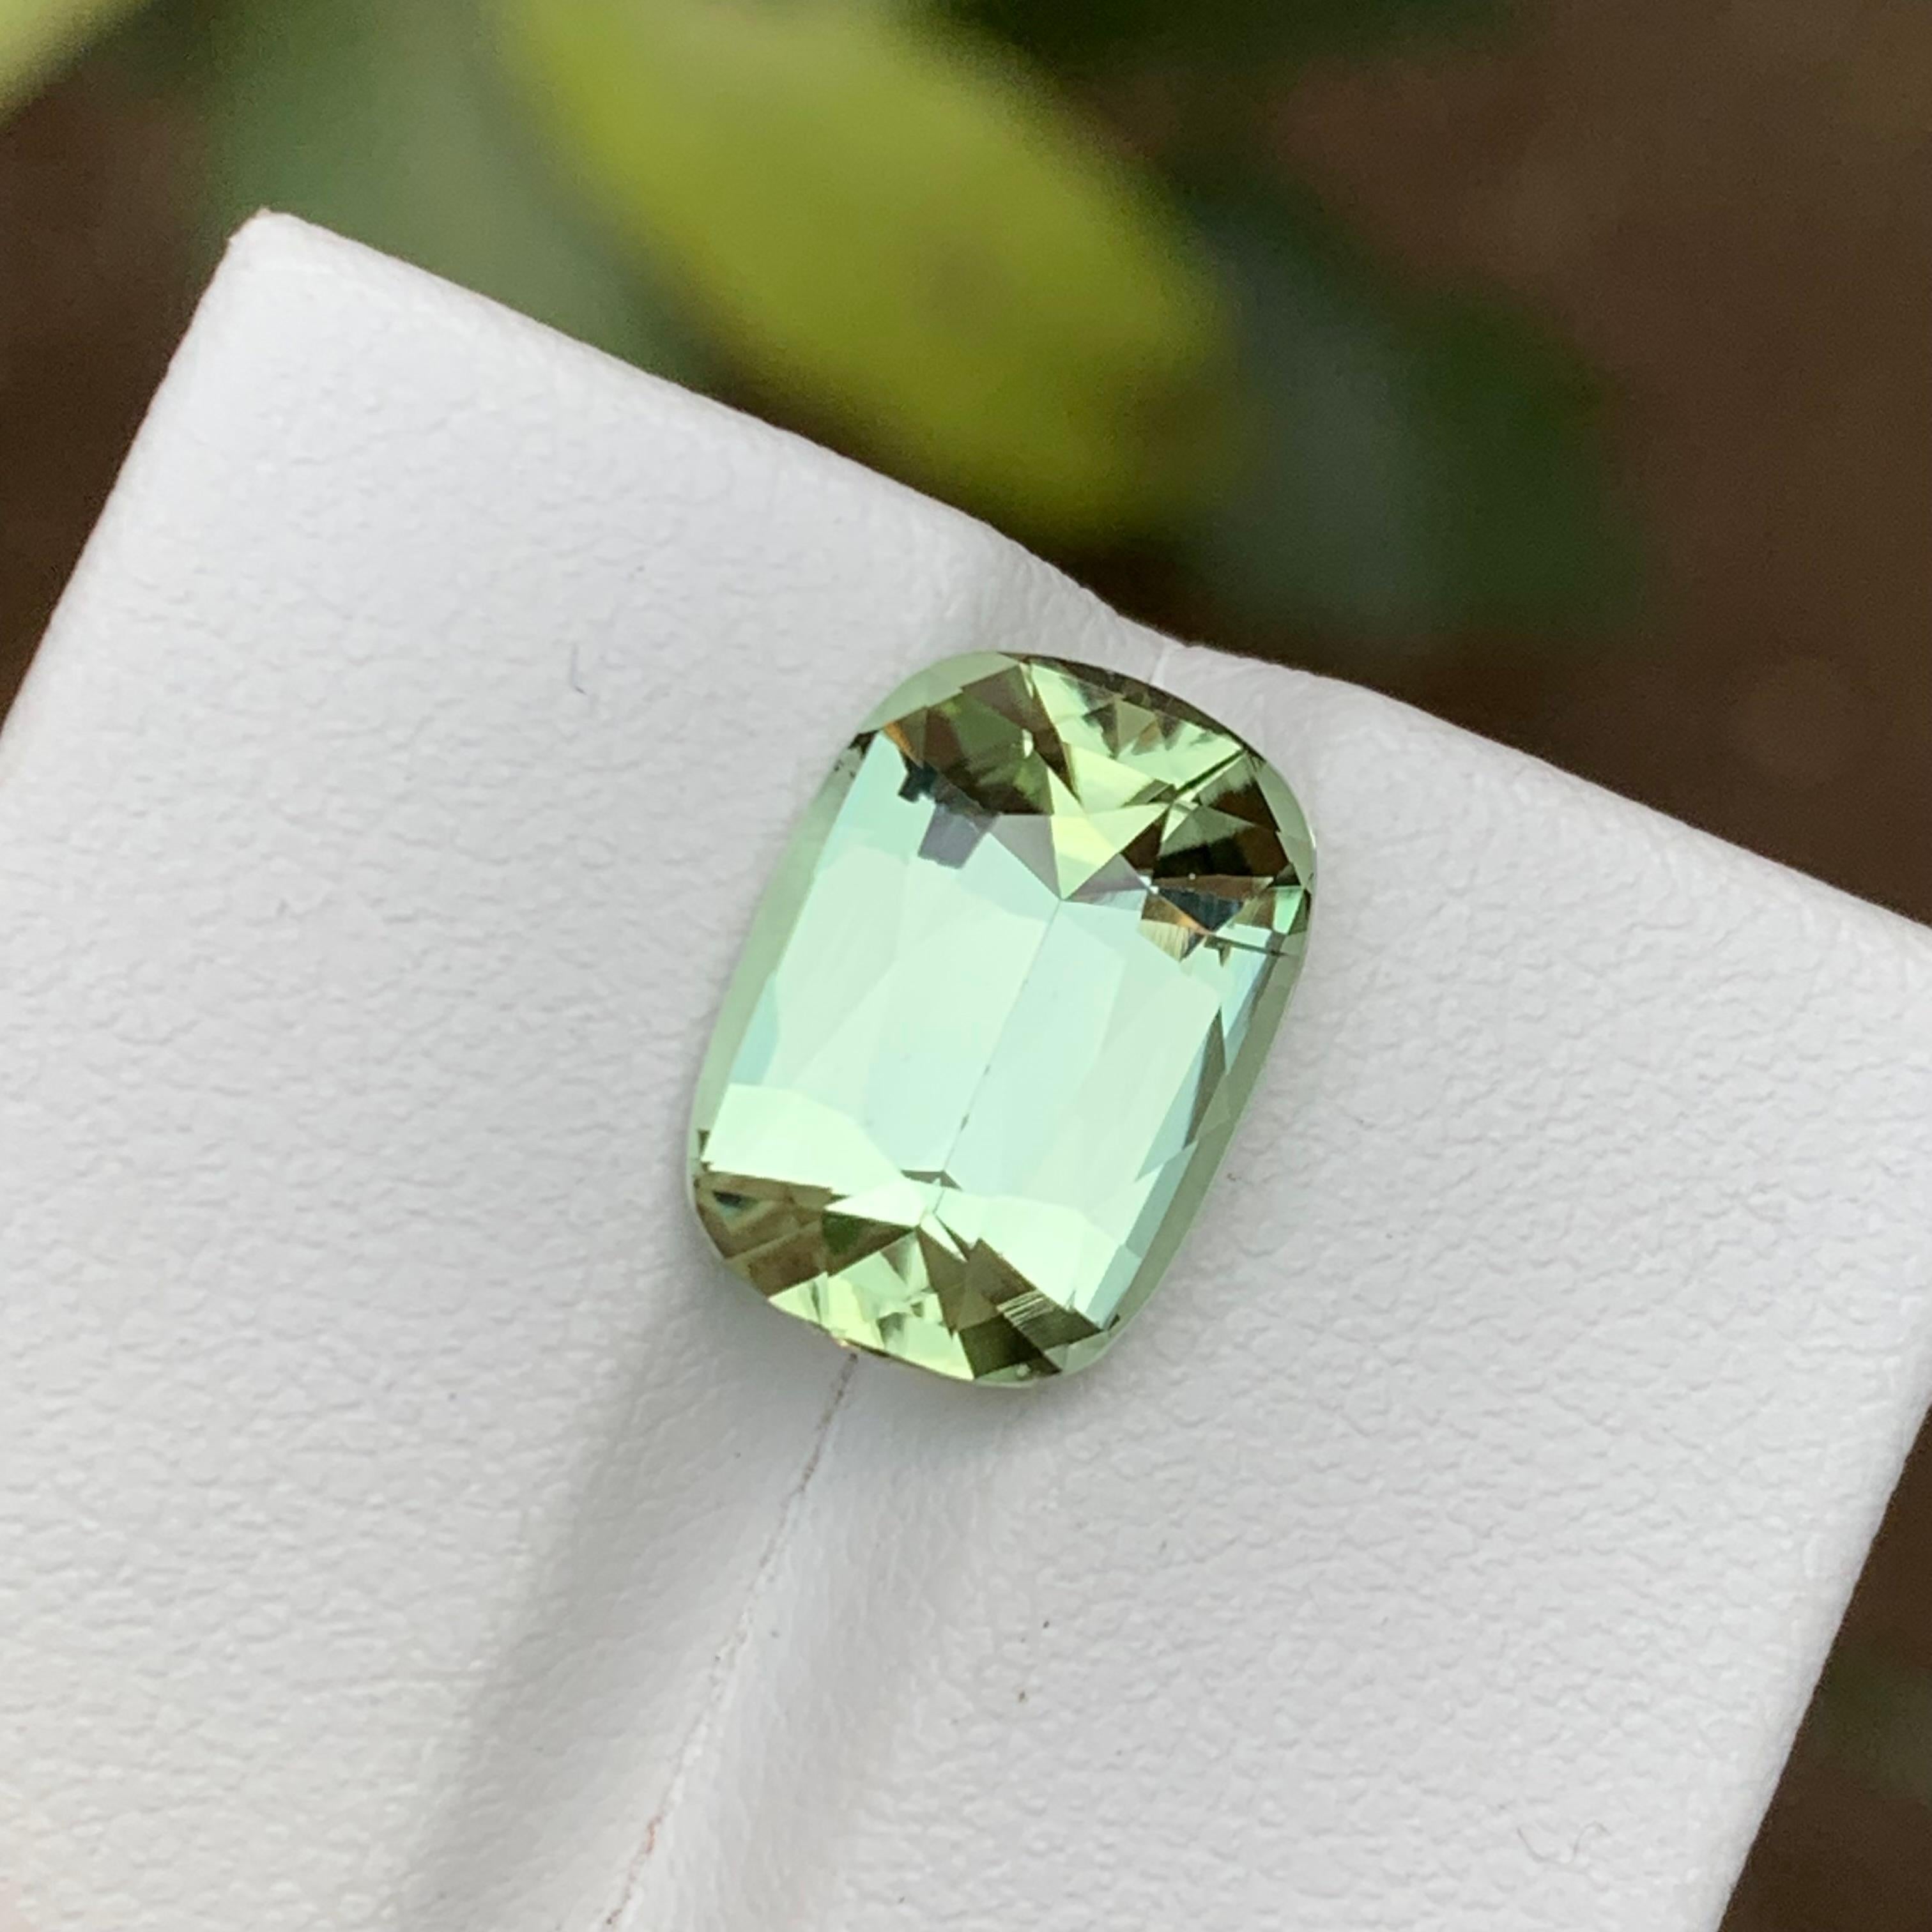 Pale Green Natural Tourmaline Gemstone 5.35 Ct Step Cushion Cut for Ring/Pendant For Sale 5